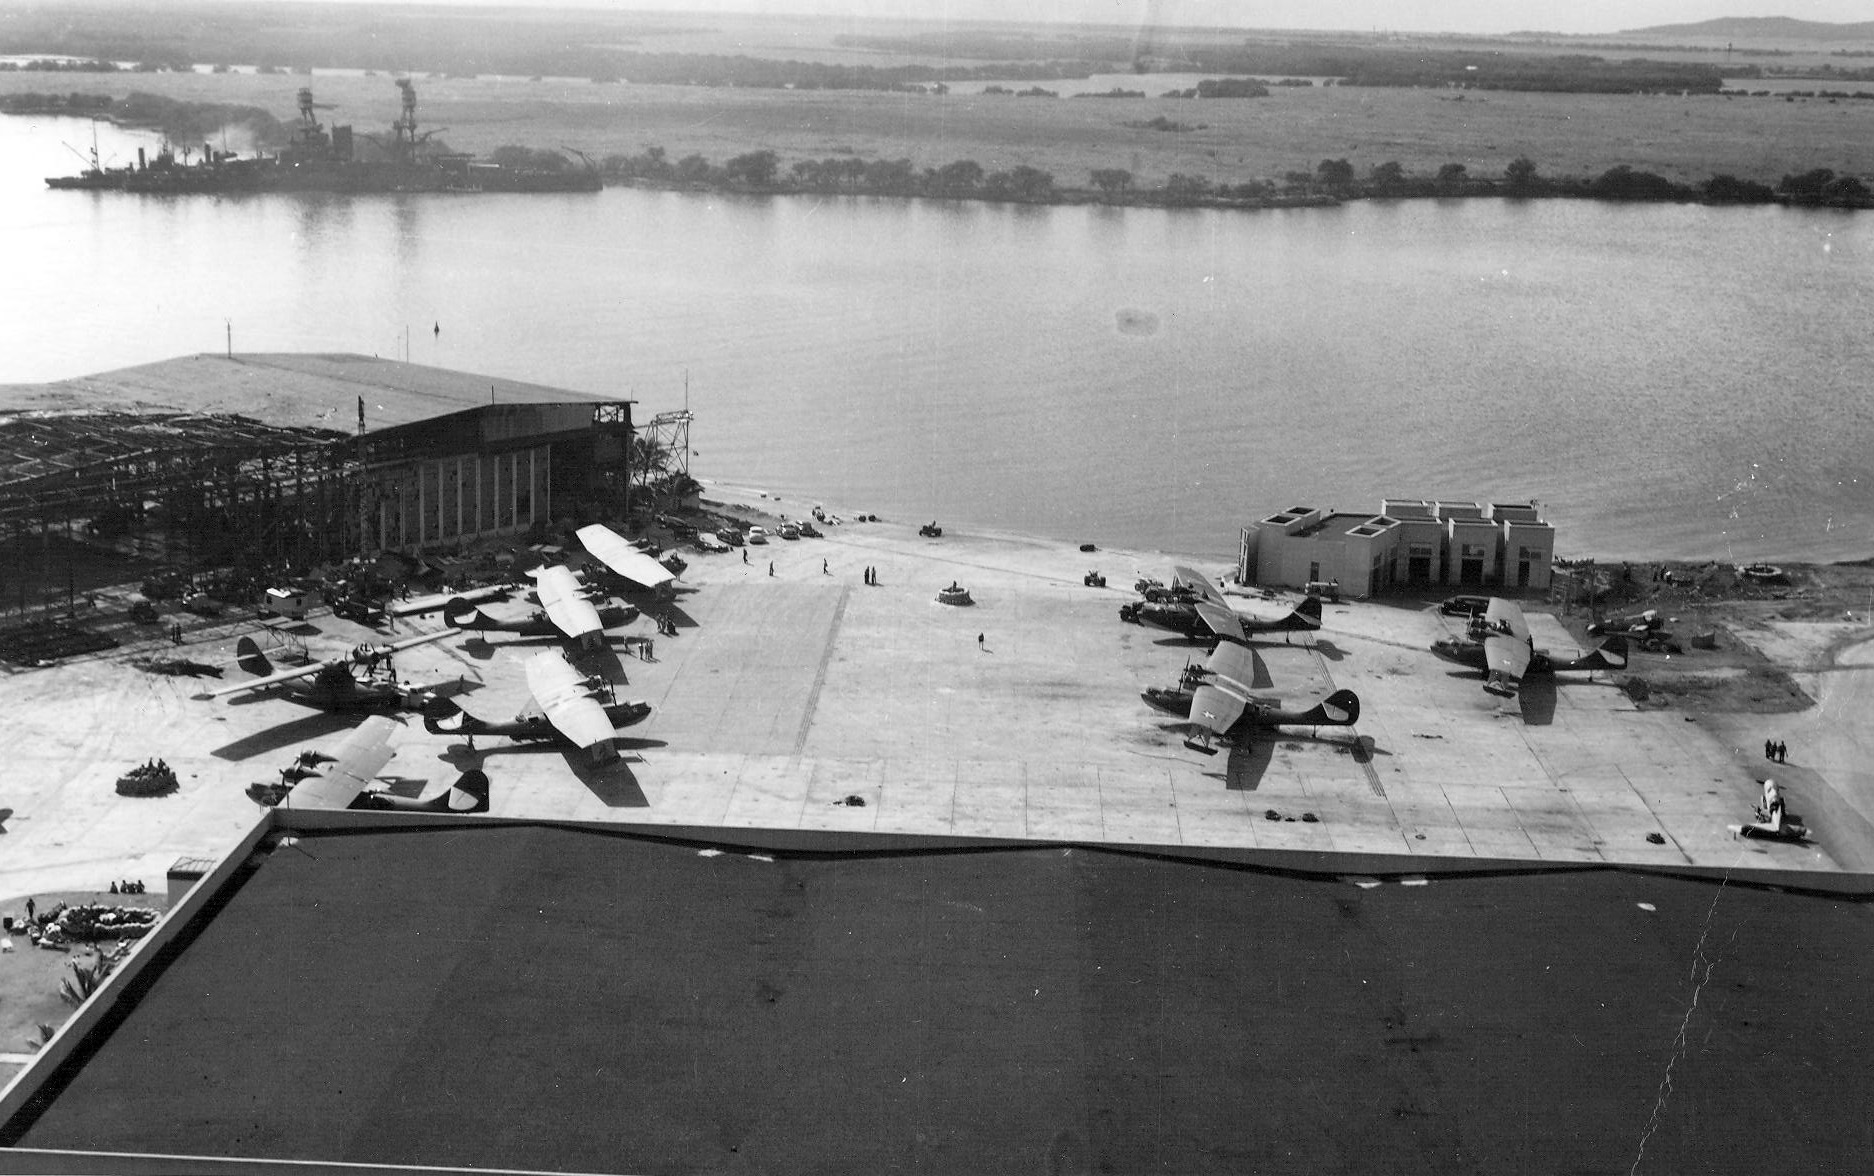 View of Naval Air Station Ford Island, Oahu, US Territory of Hawaii, 8 Dec 1941 from the Ford Island water tower; note PBY aircraft on the ramp and USS Nevada after her move from Hospital Point to the Waipio Peninsula